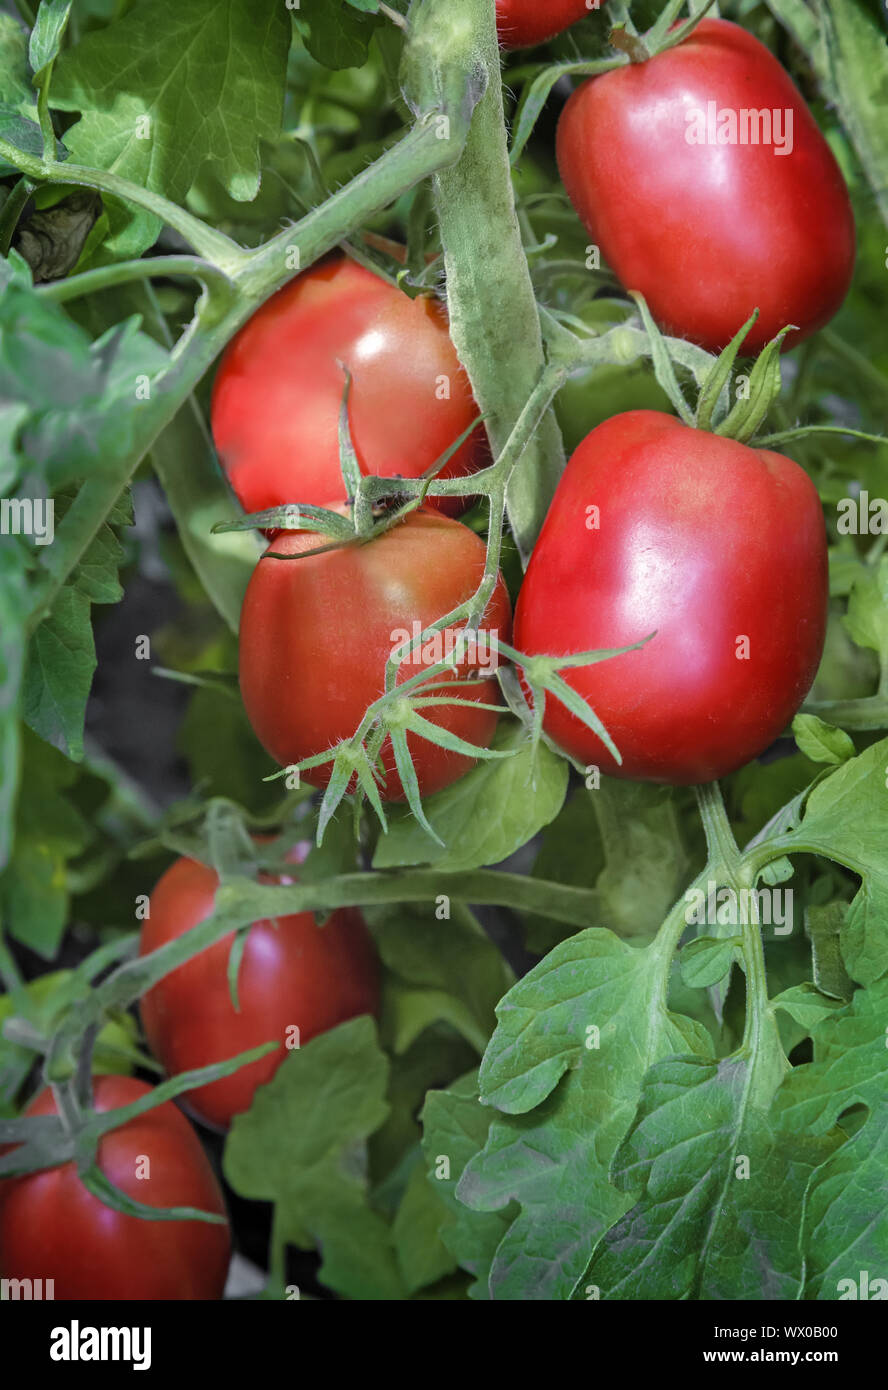 Tomatoes ripen on the branches of a Bush. Stock Photo